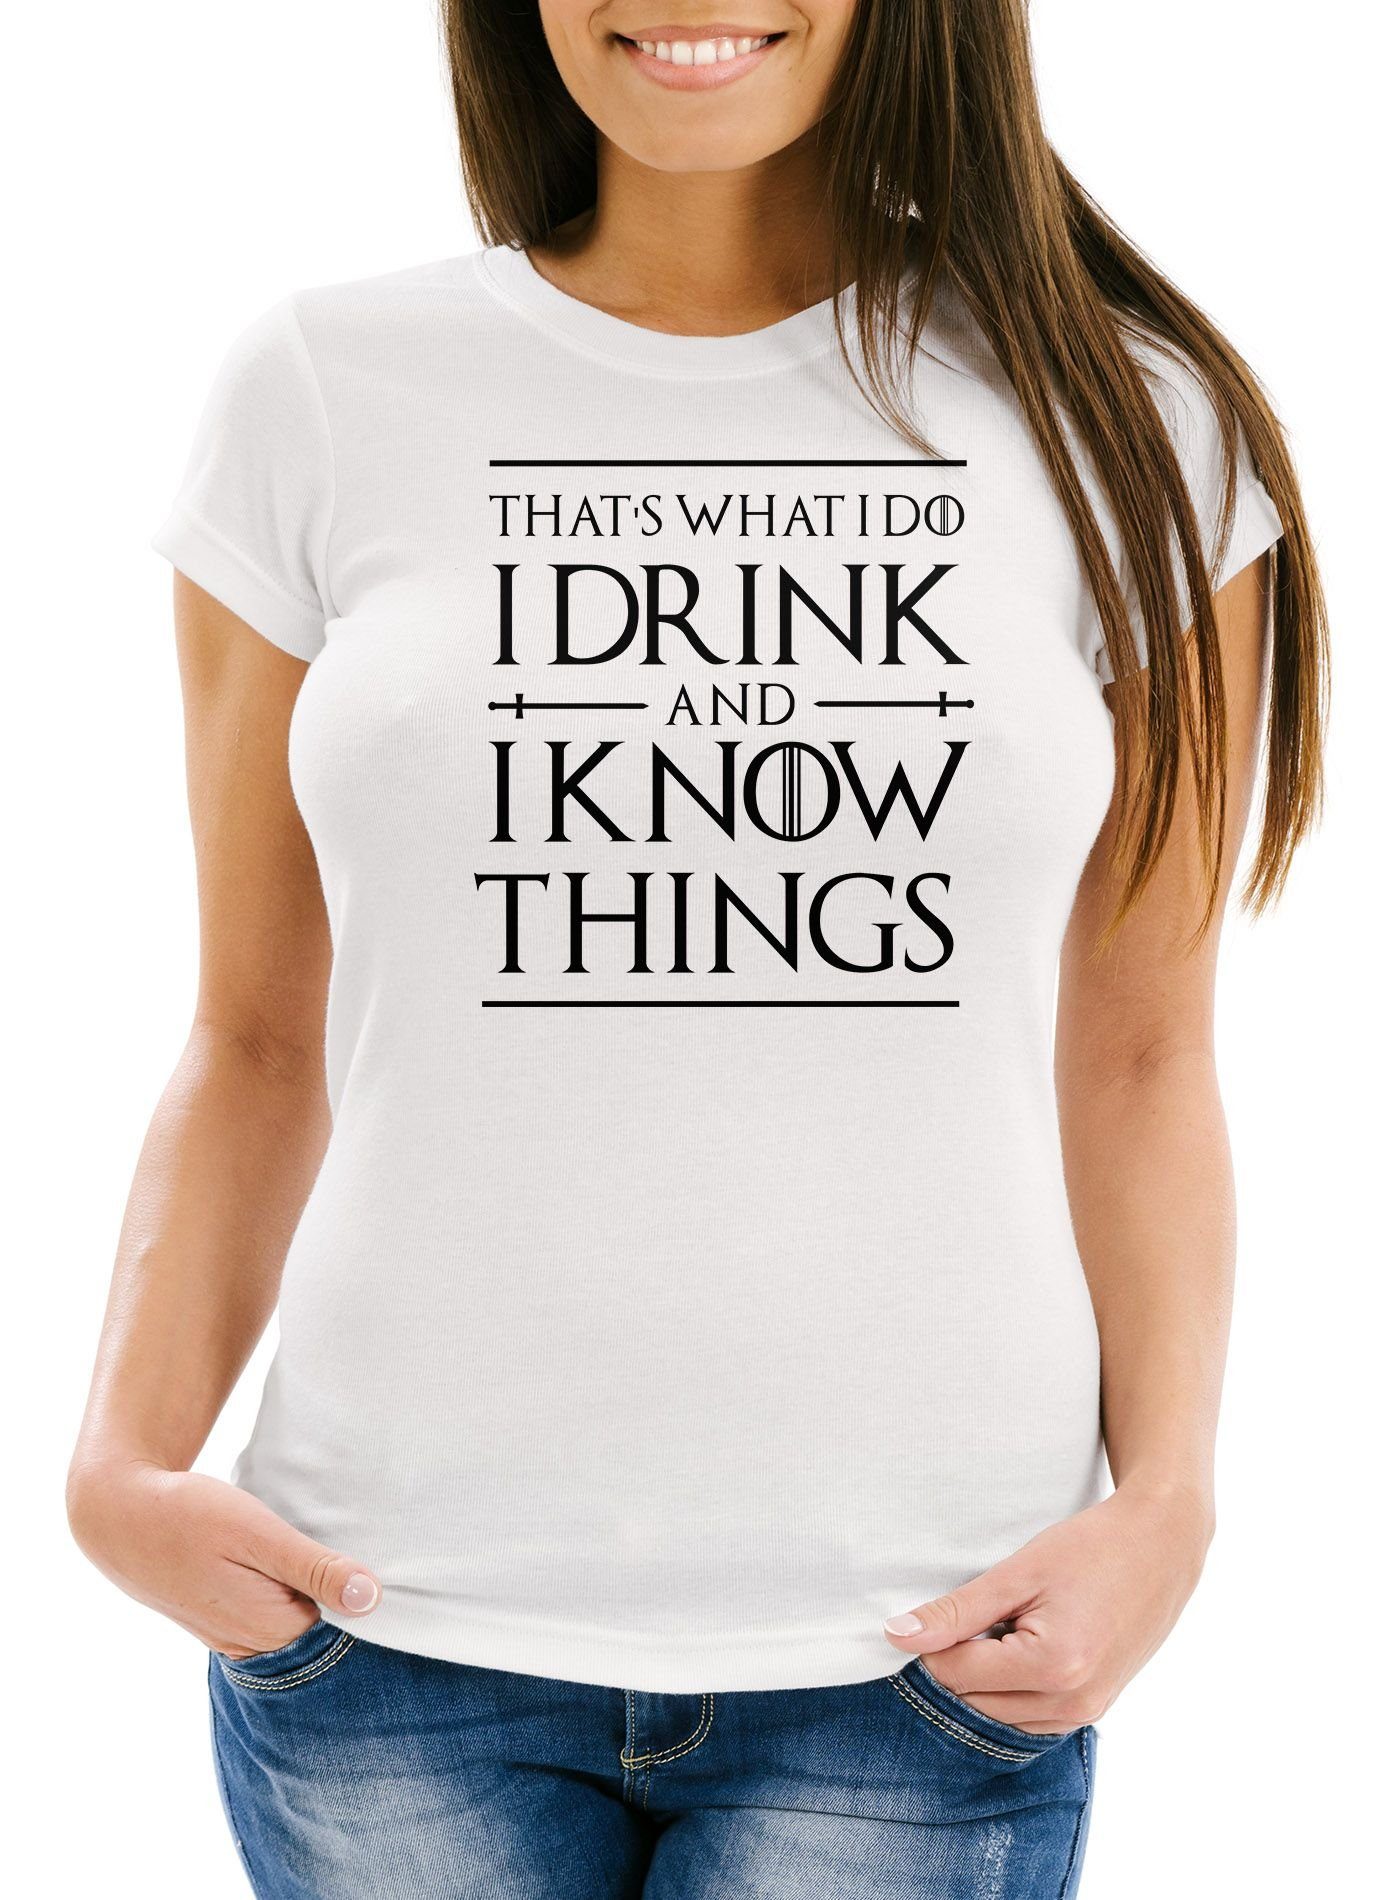 MoonWorks Print-Shirt Damen T-Shirt Spruch that's what i do i drink and i know things Moonworks® mit Print